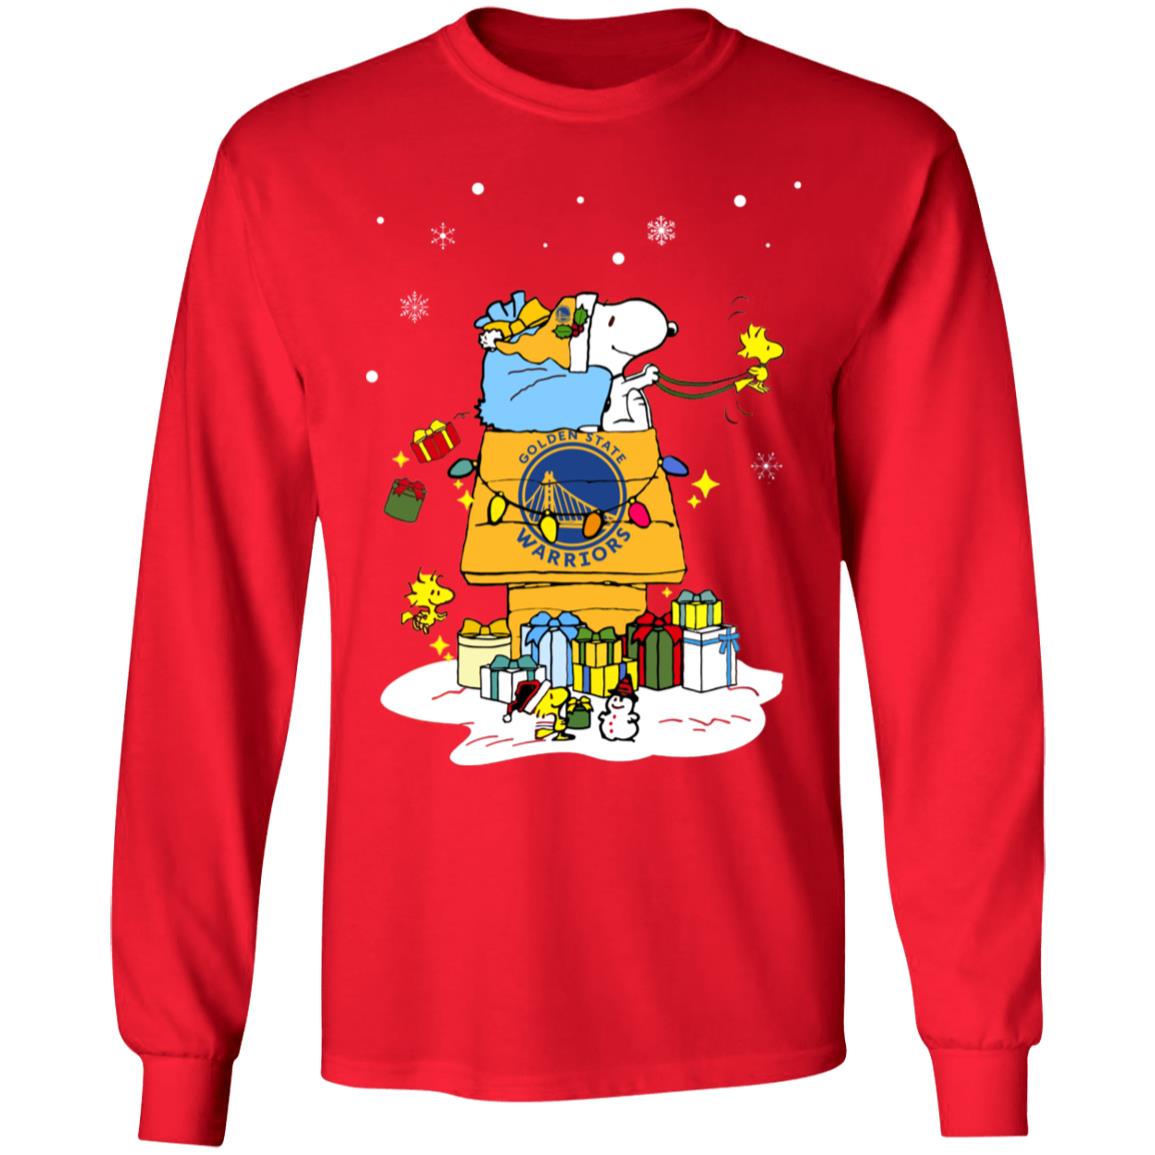 Golden State Warriors Snoopy NBA AOP Ugly Christmas Sweater Christtmas  Holiday Gift - Freedomdesign